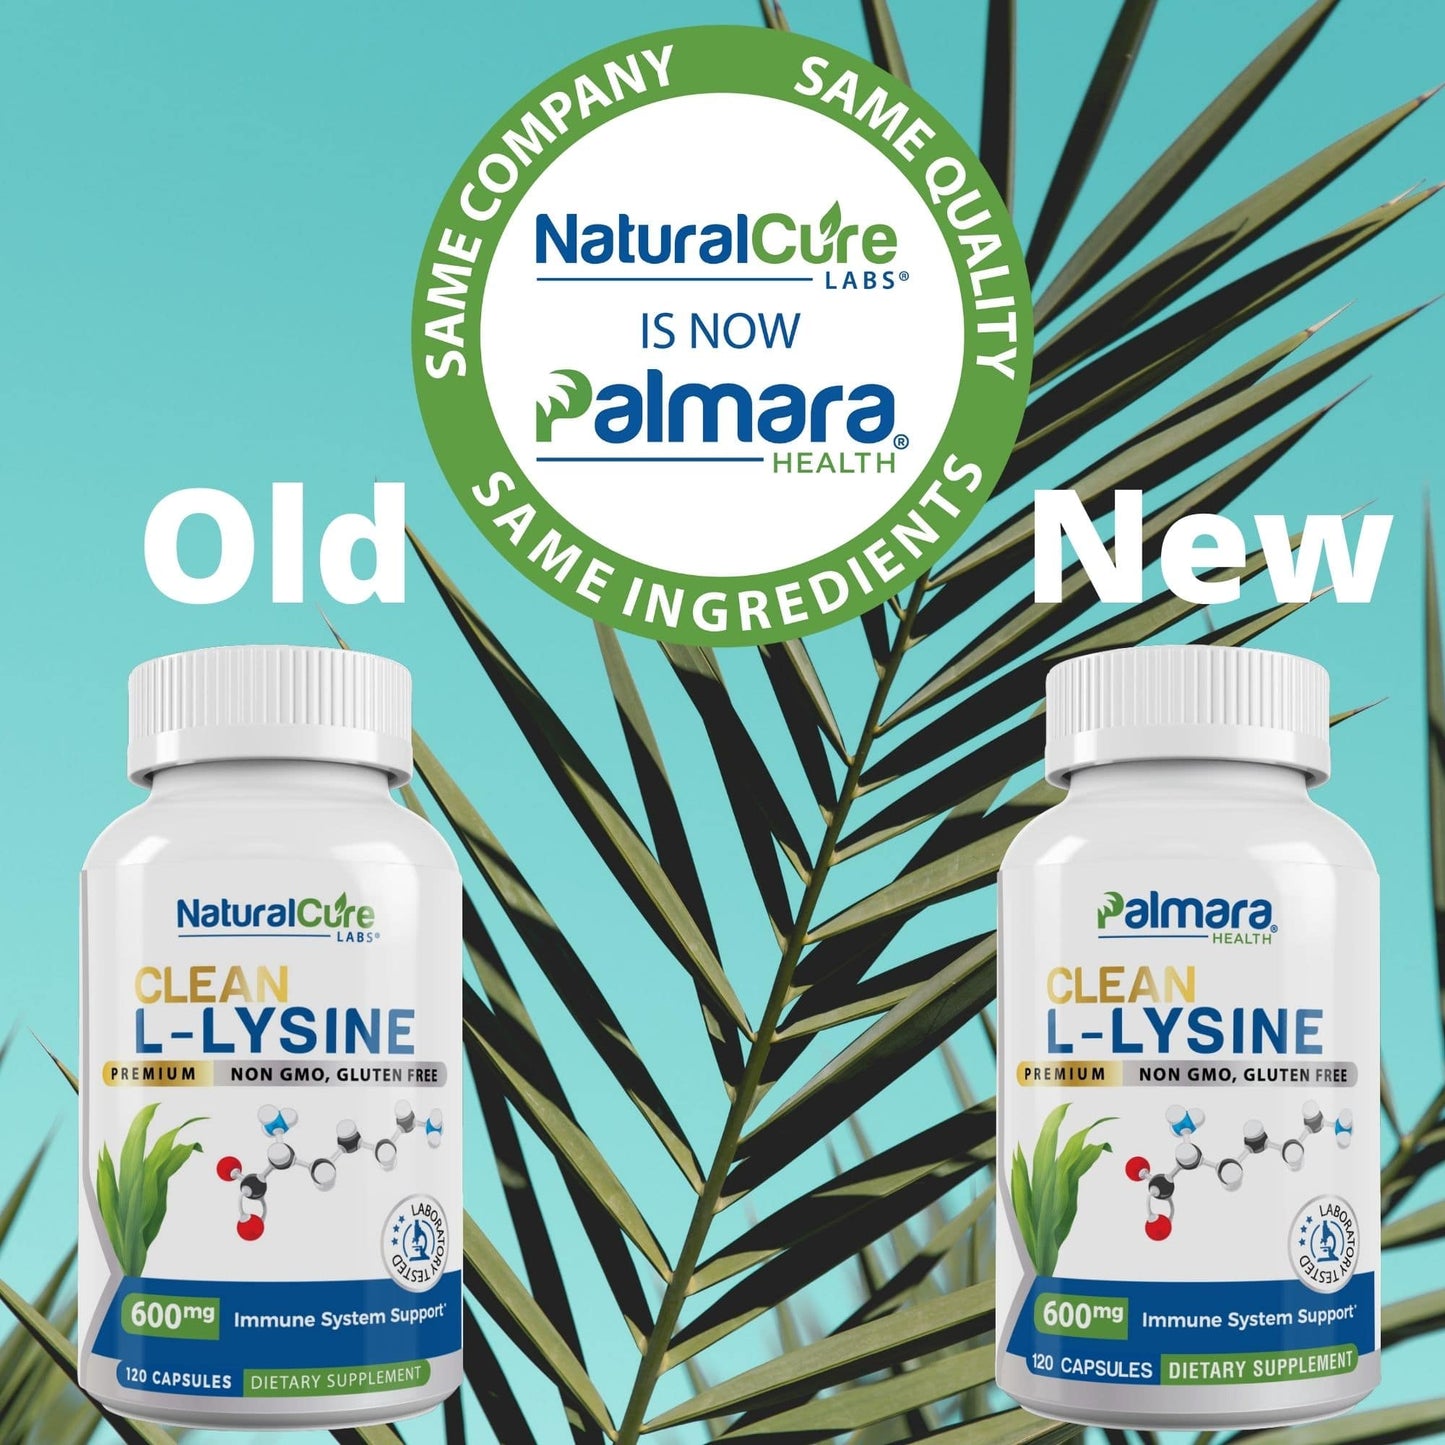 
                  
                    Image displaying two bottles of Clean L-Lysine supplements to announce a rebranding: the left bottle is labeled "Old" with the NaturalCure Labs brand, and the right bottle is labeled "New" with the Palmara Health brand, both containing 600mg of the product. A circular badge in the center states "SAME COMPANY, SAME QUALITY, SAME INGREDIENTS, NaturalCure Labs IS NOW Palmara Health," set against a backdrop of tropical leaves and a blue sky, emphasizing continuity despite the brand change.
                  
                